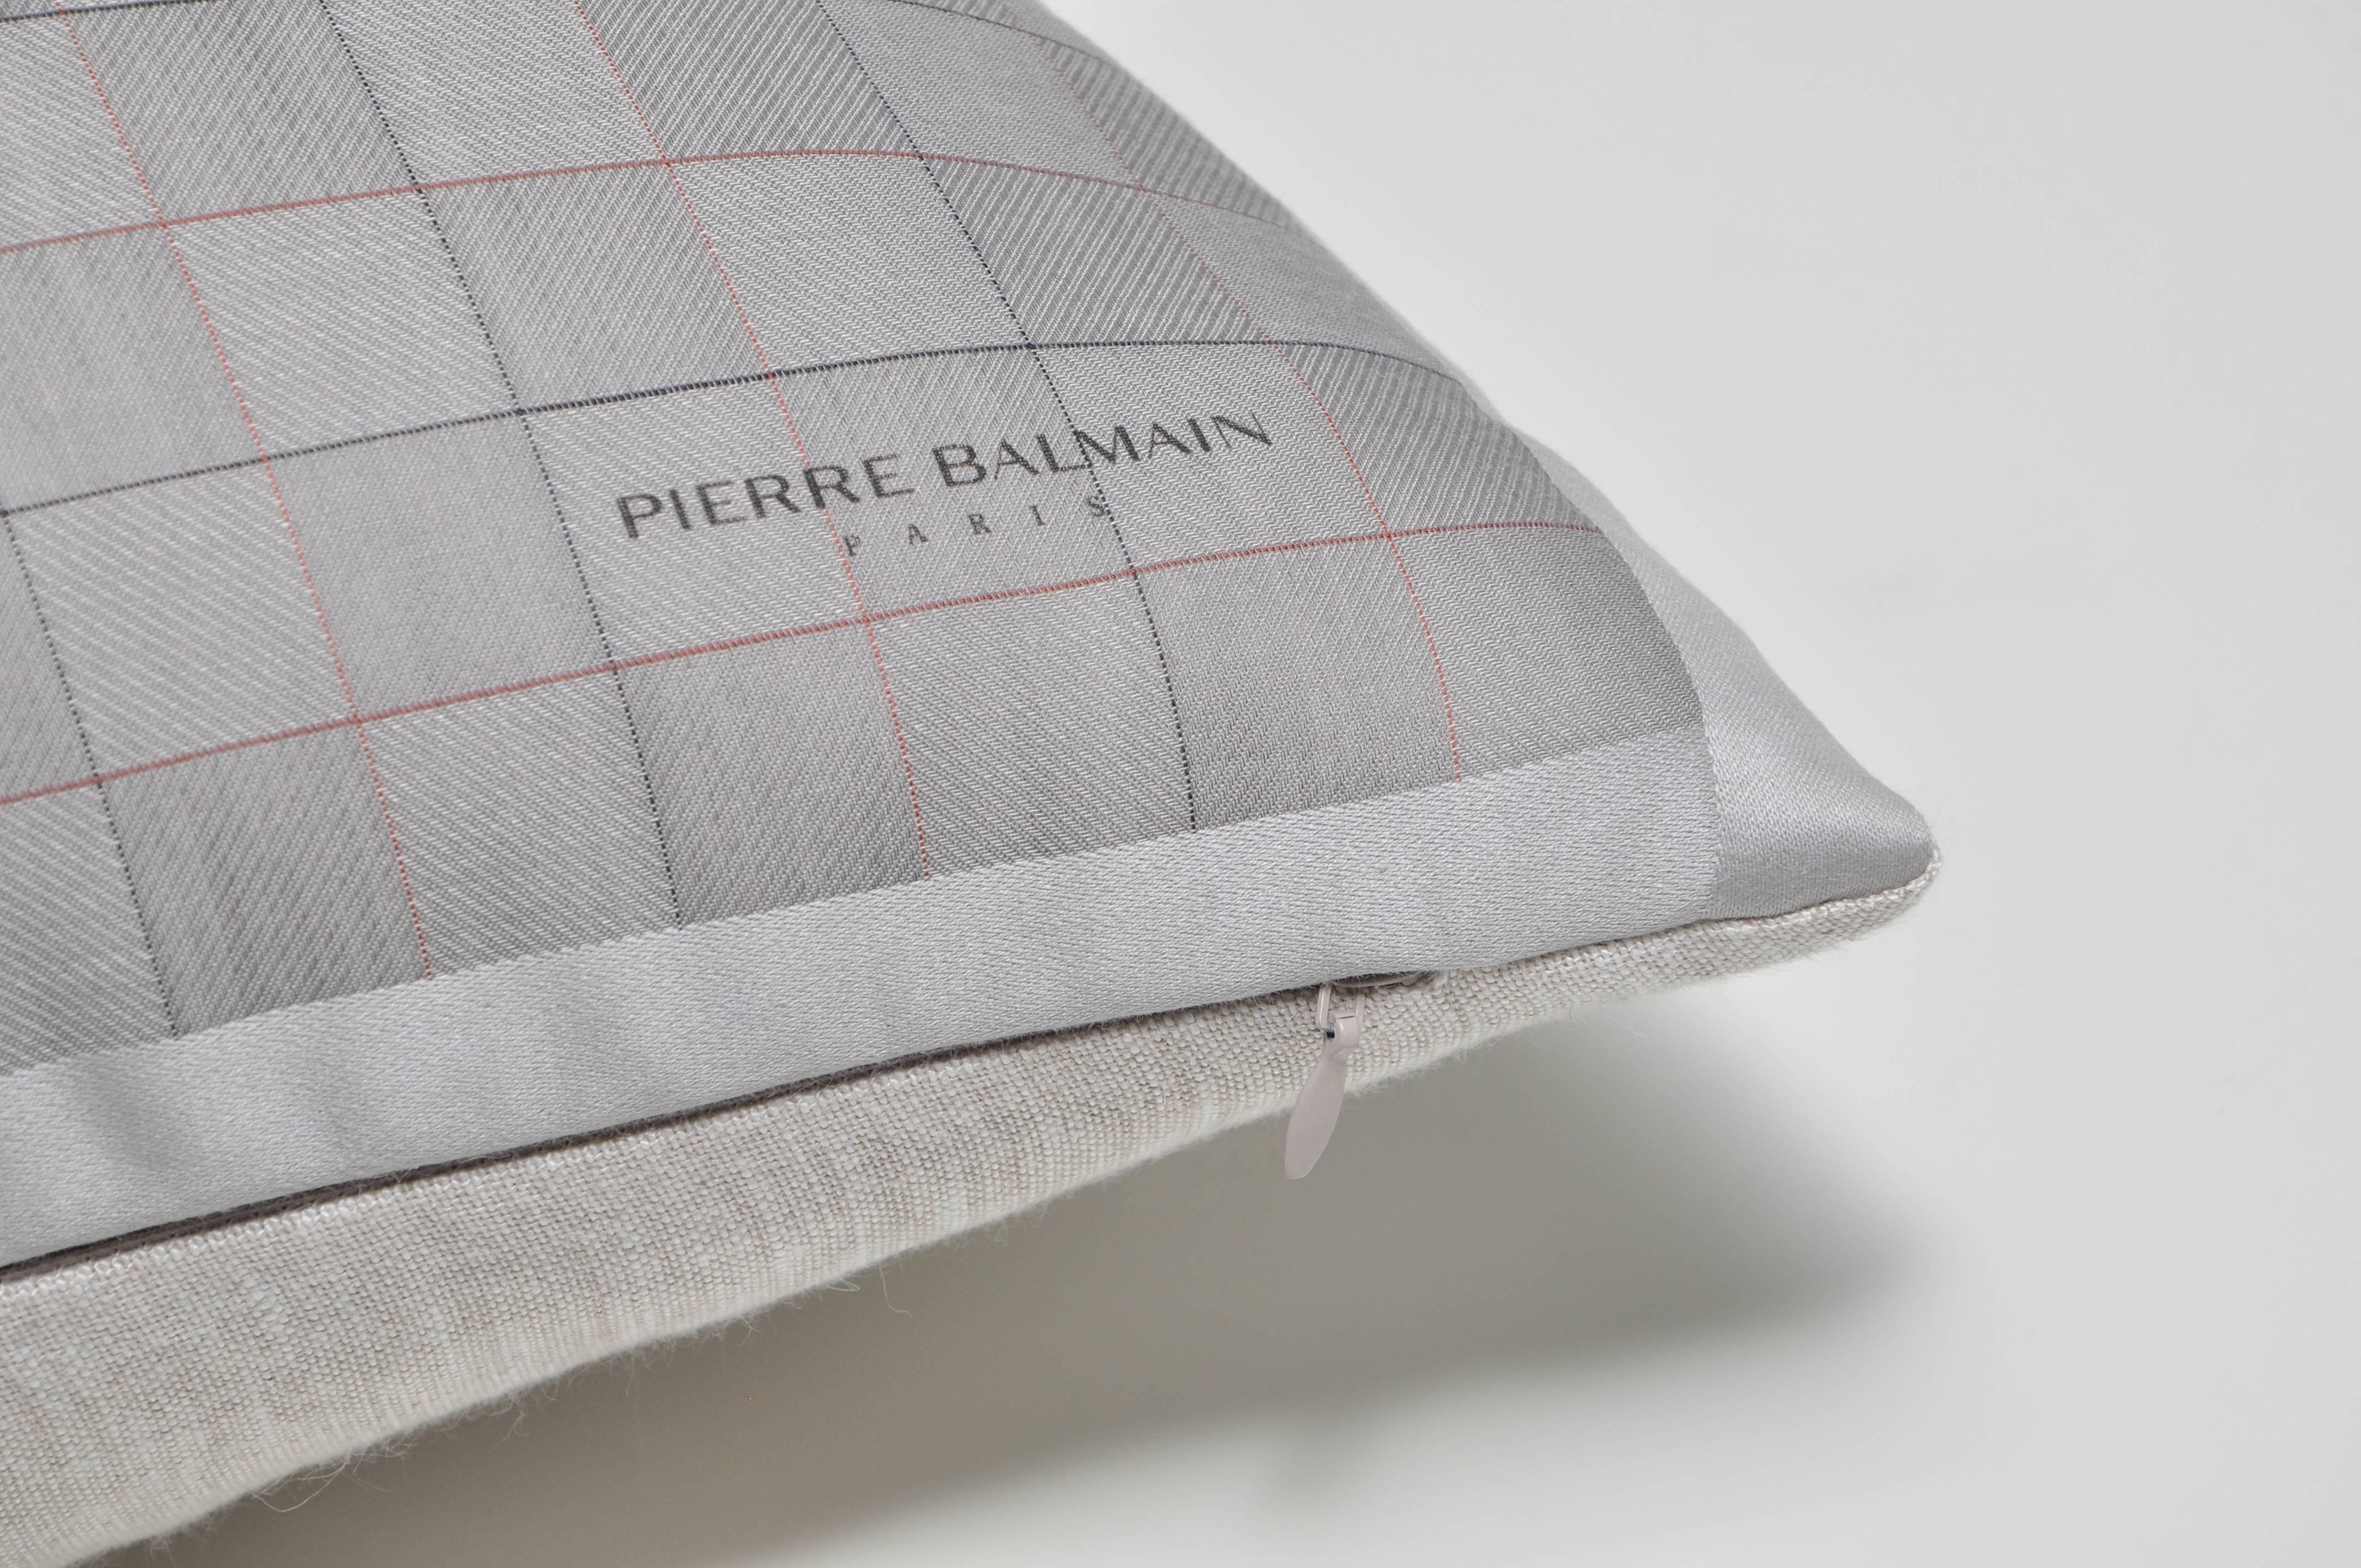 Custom-made one-of-a-Kind cushion (pillow) created from a luxurious vintage Pierre Balmain fashion scarf in a beautifully soft plaid design. Sumptuously soft to the touch with a subtle sheen and visible diagonal grain with varying direction in